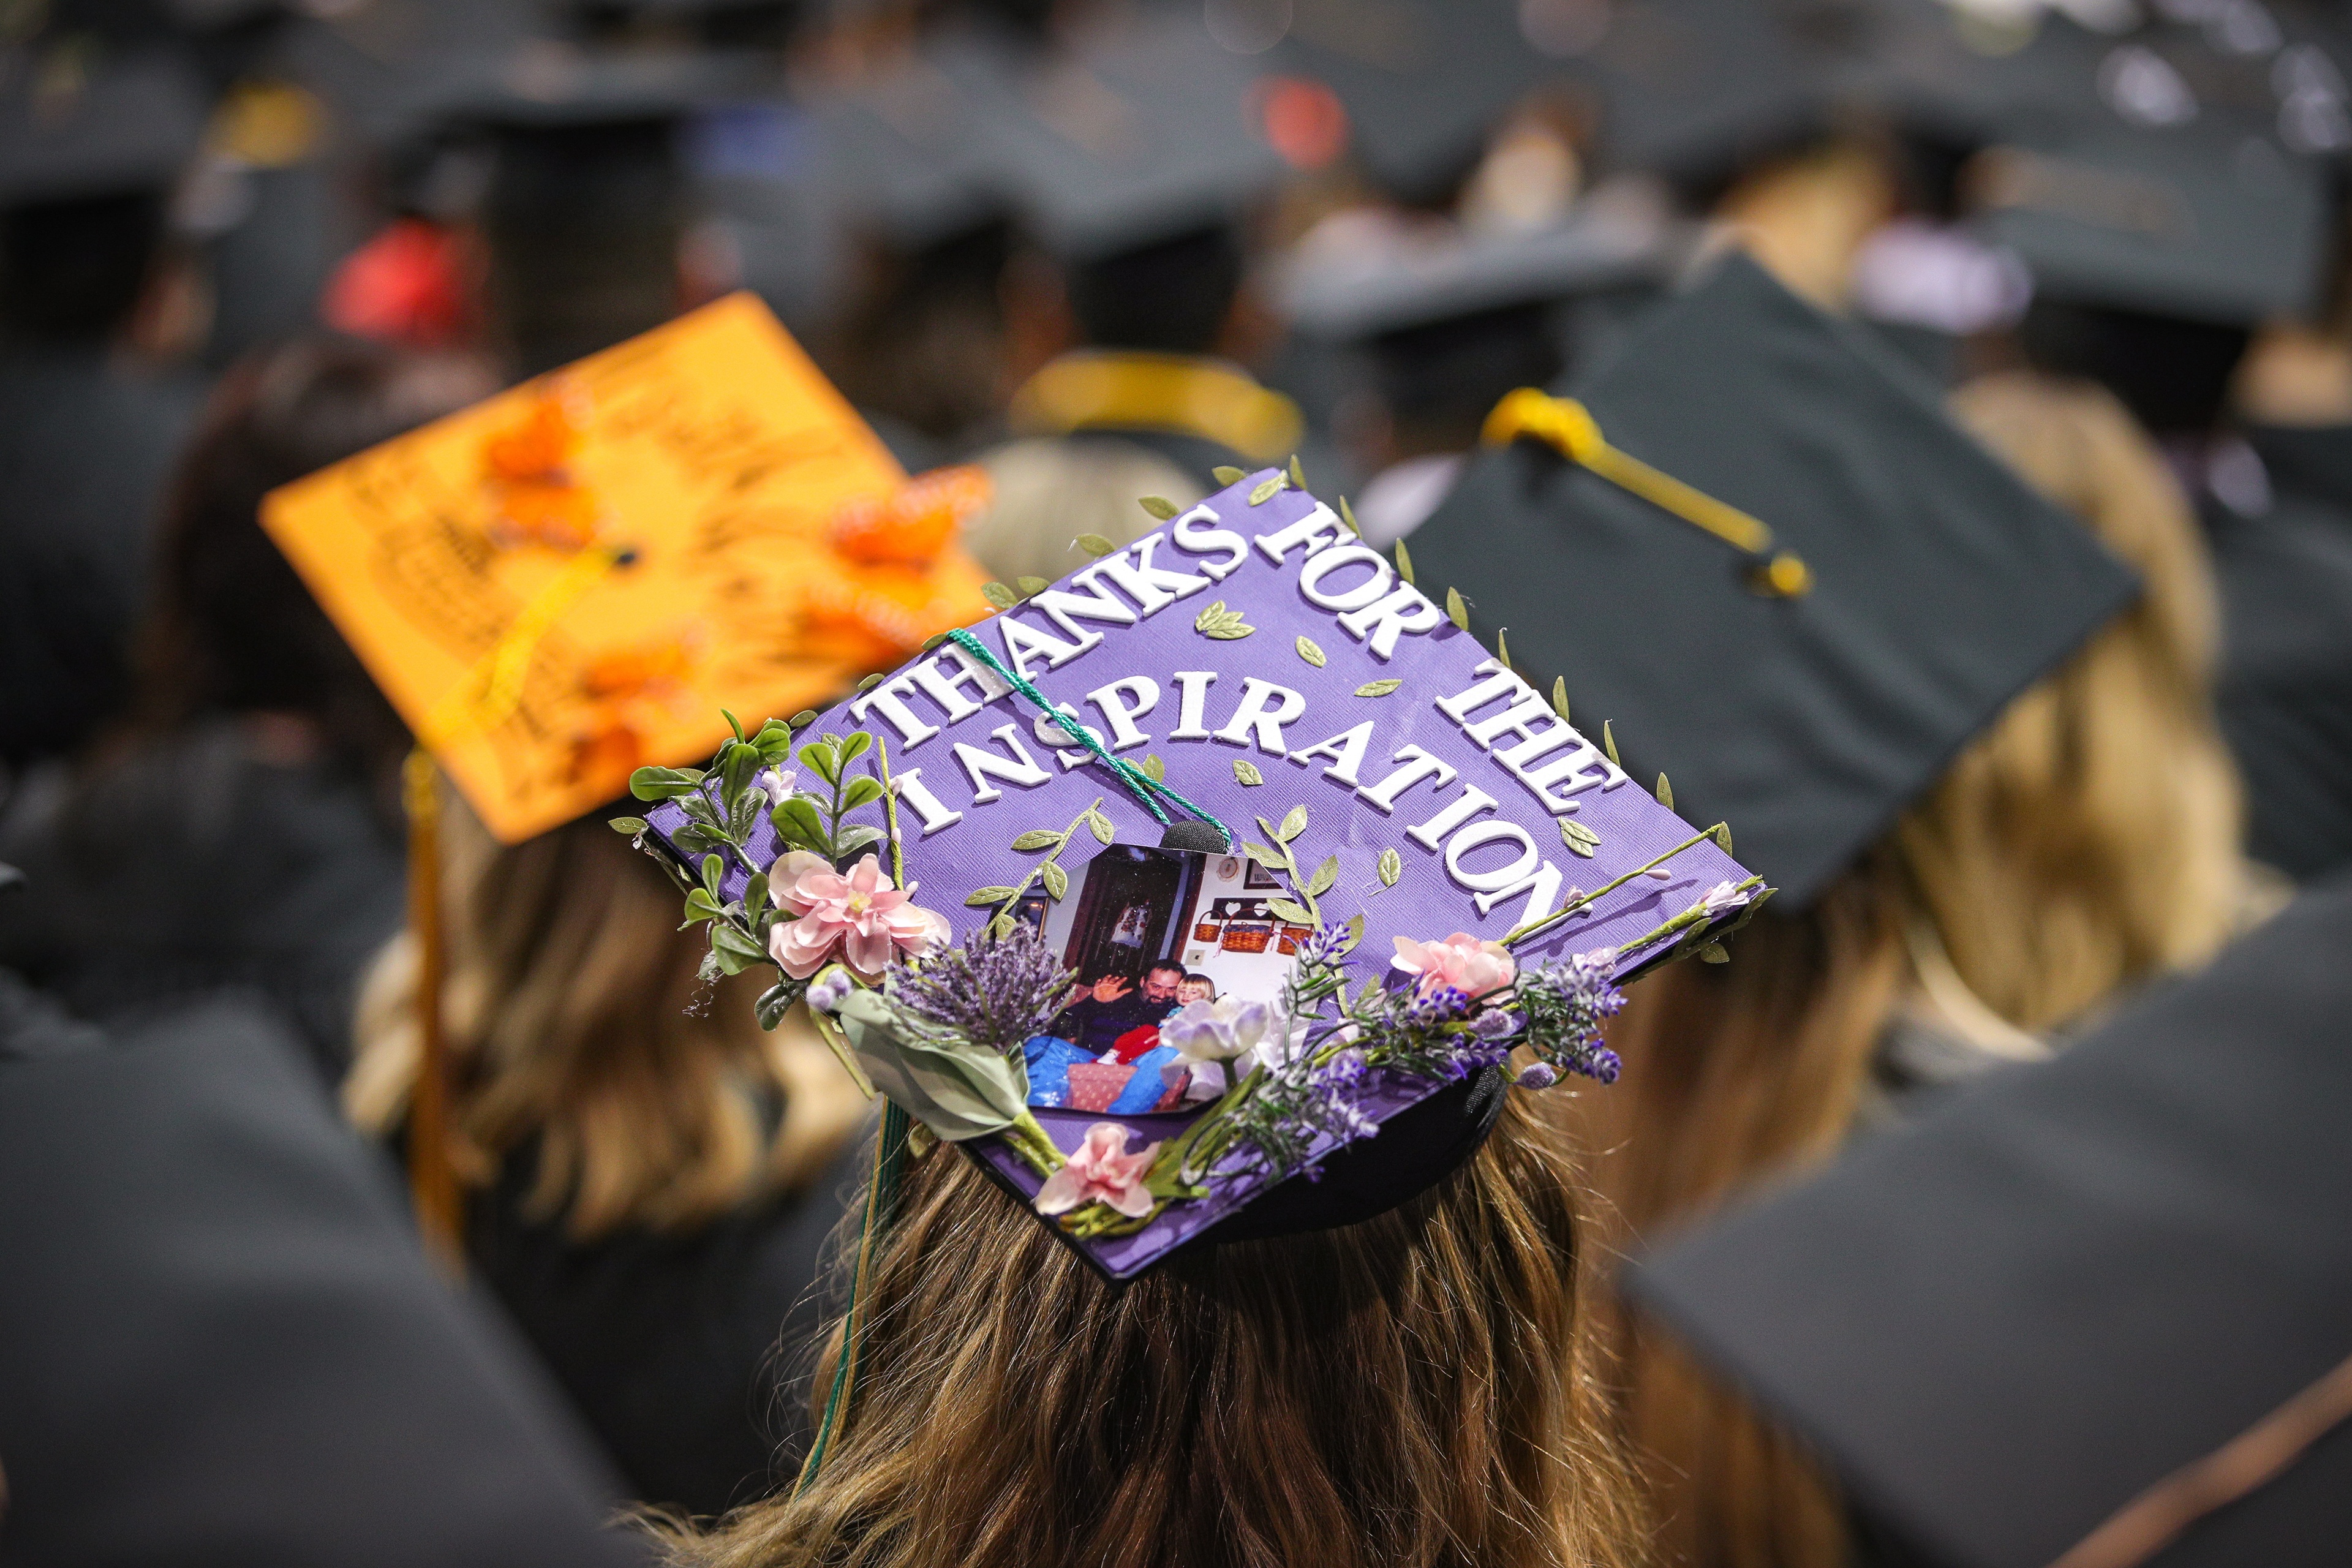 Graduation cap says, “Thanks for the inspiration” with photo of dad and daughter